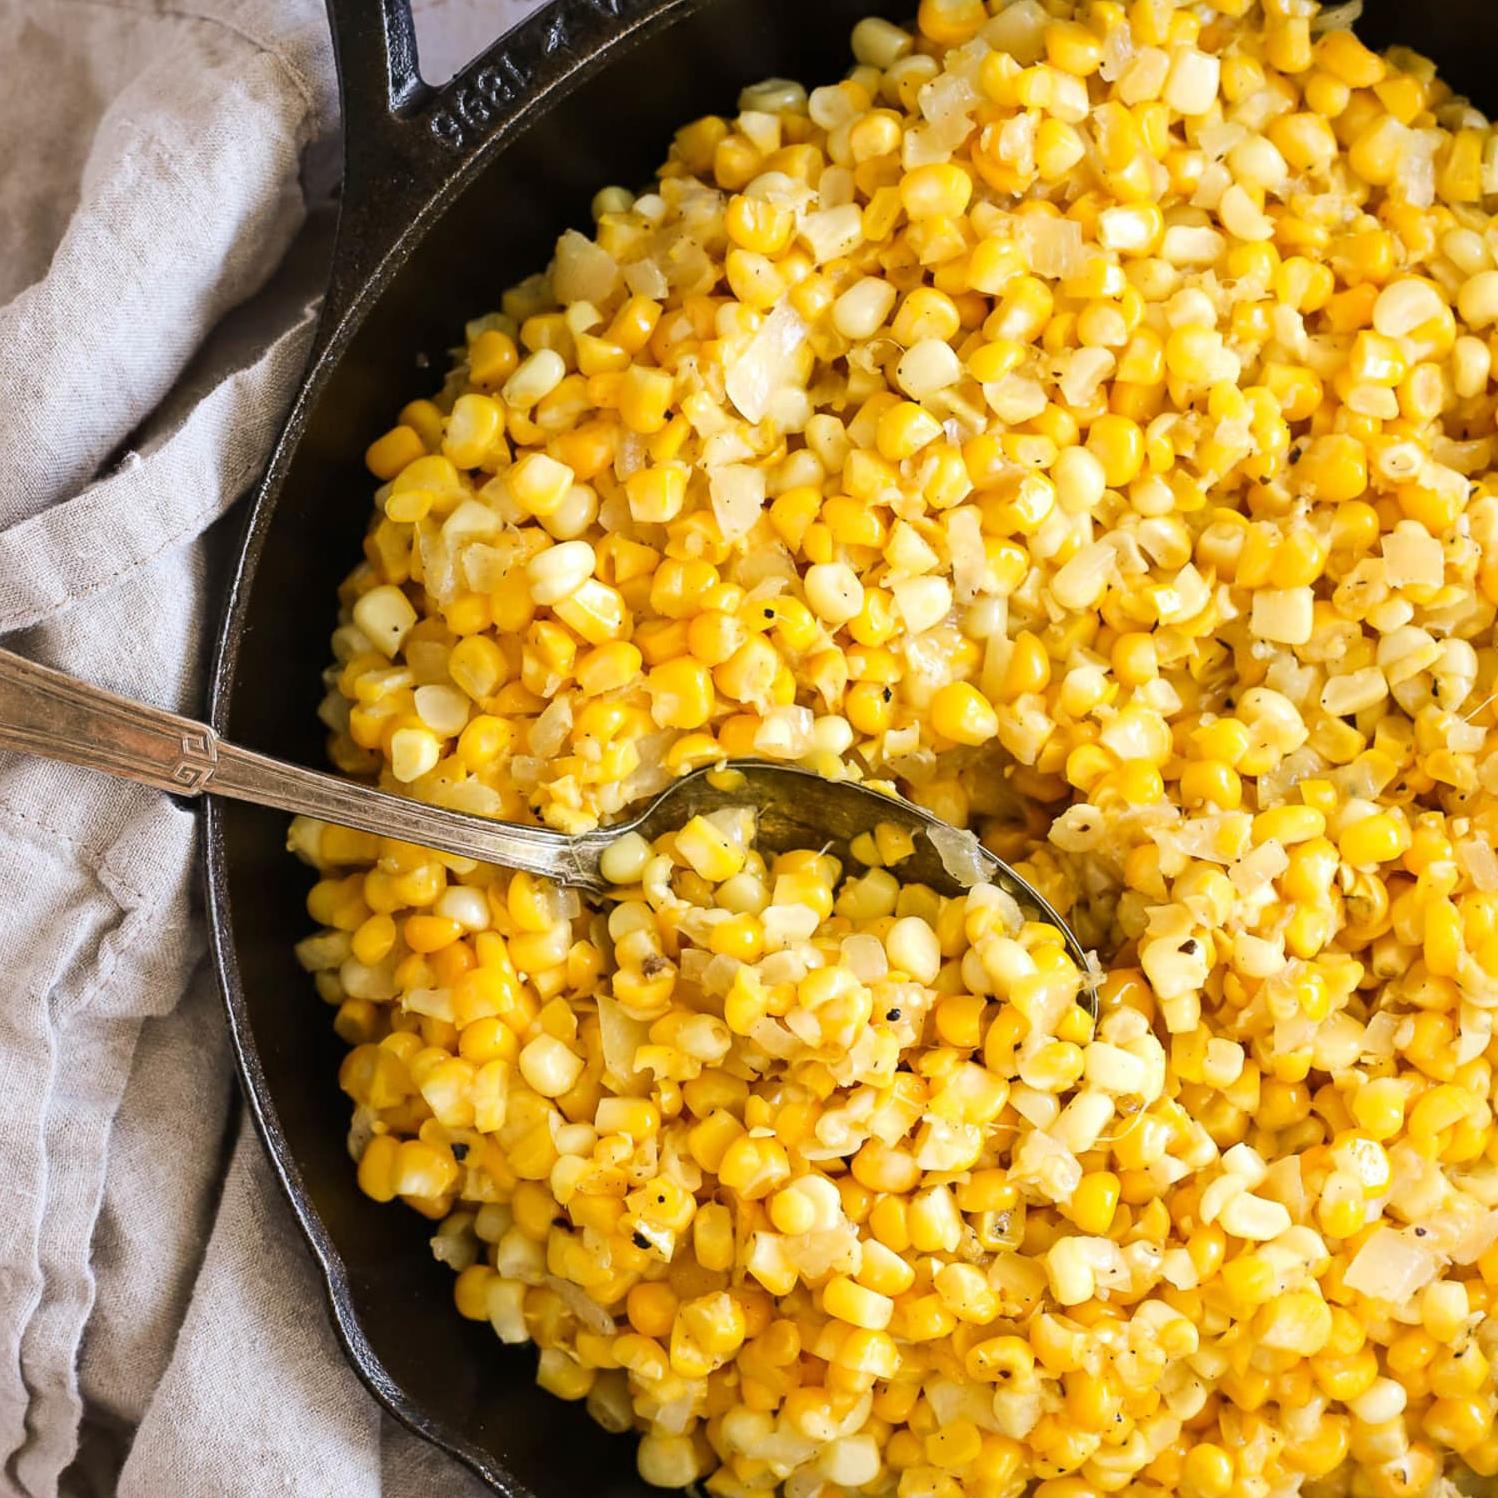  Remember the time when corn on the cob was just a side dish? Nope, neither do we after this recipe.